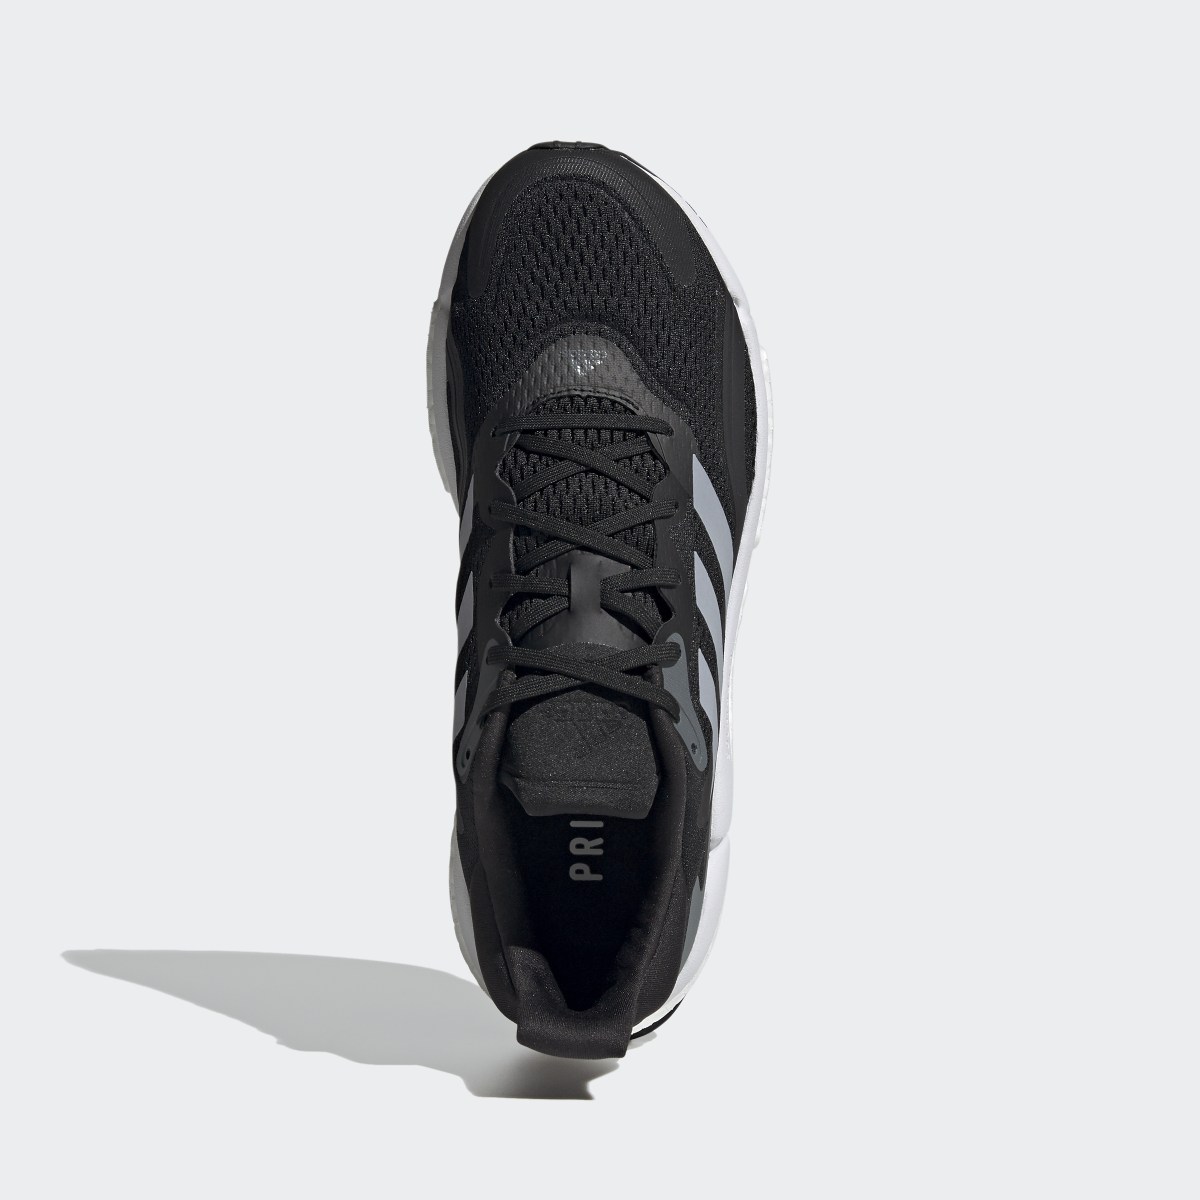 Adidas SolarBoost 3 Shoes. 4